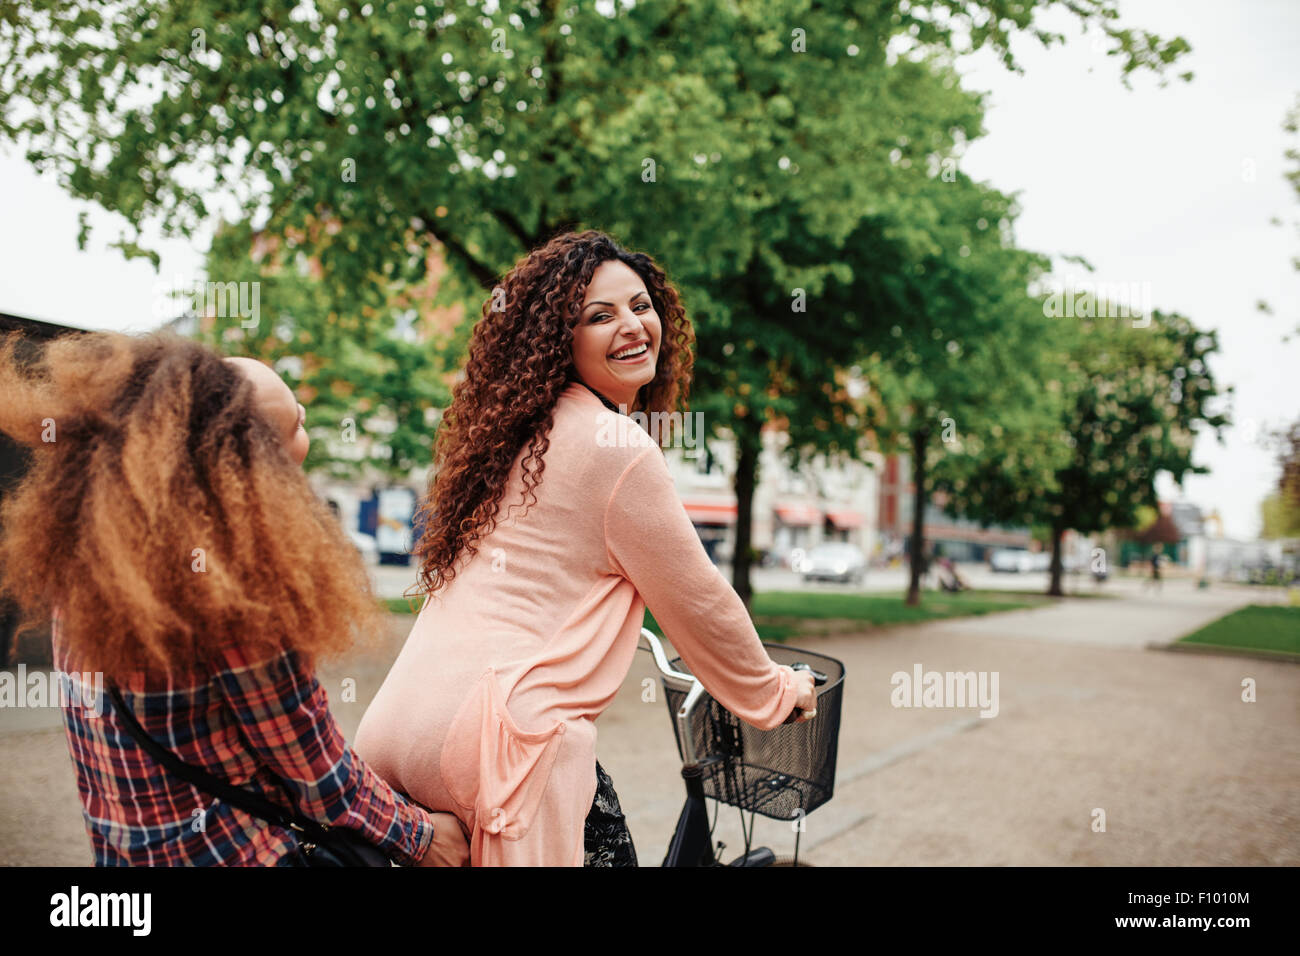 Portrait of beautiful young woman riding bicycle with her friend. Female friends having fun on cycle ride on city street. Stock Photo